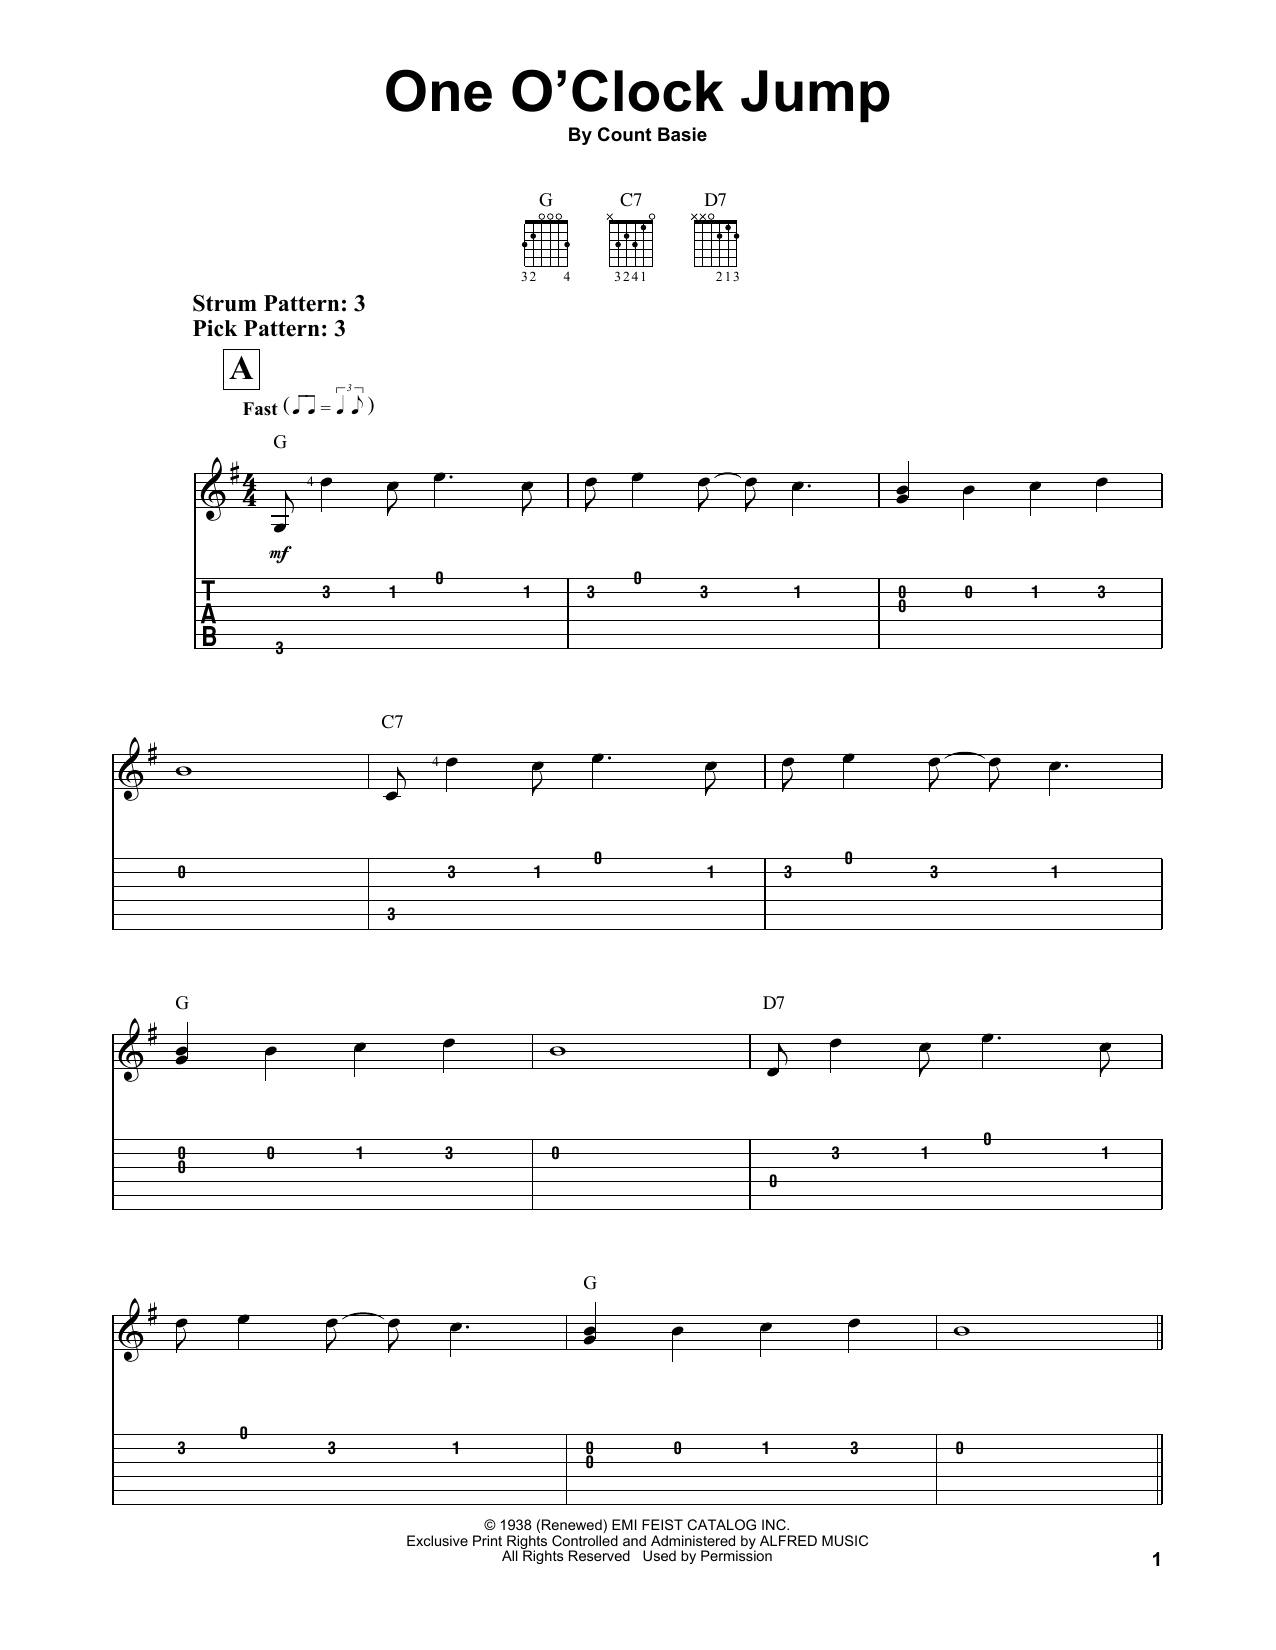 Download Count Basie One O'Clock Jump Sheet Music